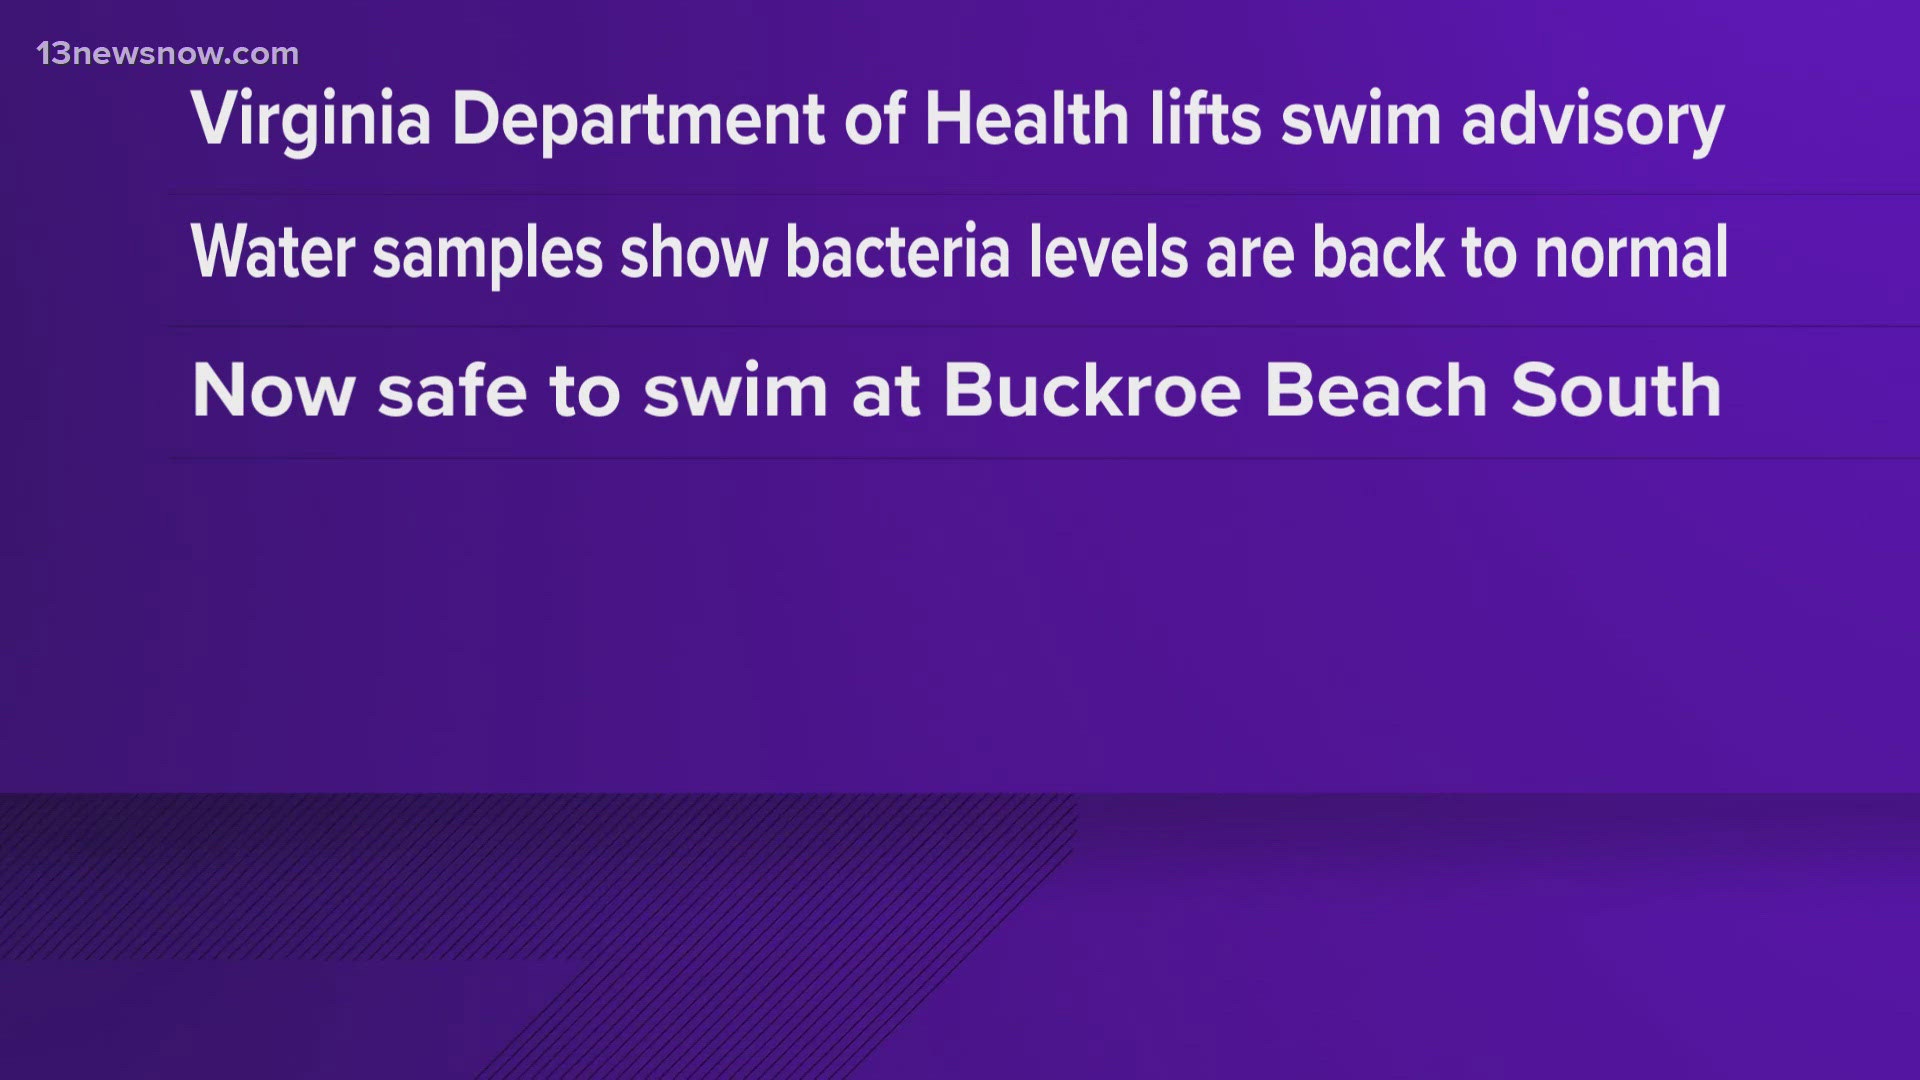 VDH shared an update Thursday saying the swimming advisory is no longer in effect since testing shows bacteria levels have returned to state quality standards.